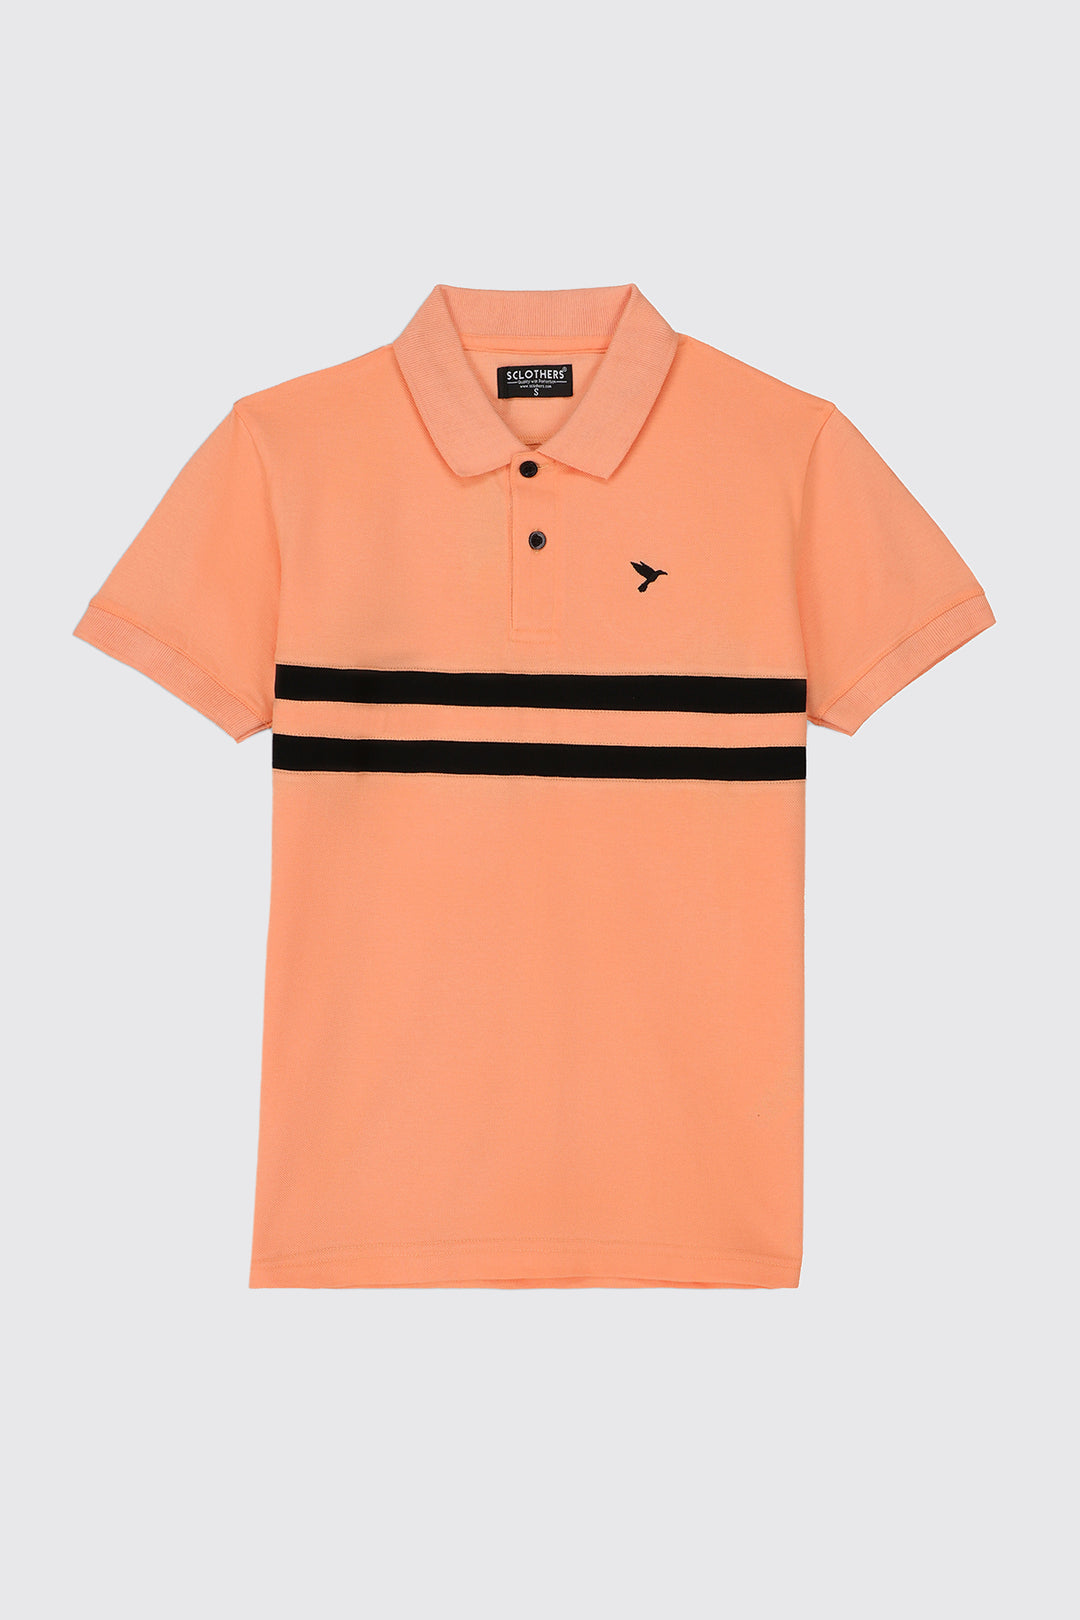 Orange Contrast Panelled Embroidered Polo Shirt (Plus Size) - S23 - MP0230P